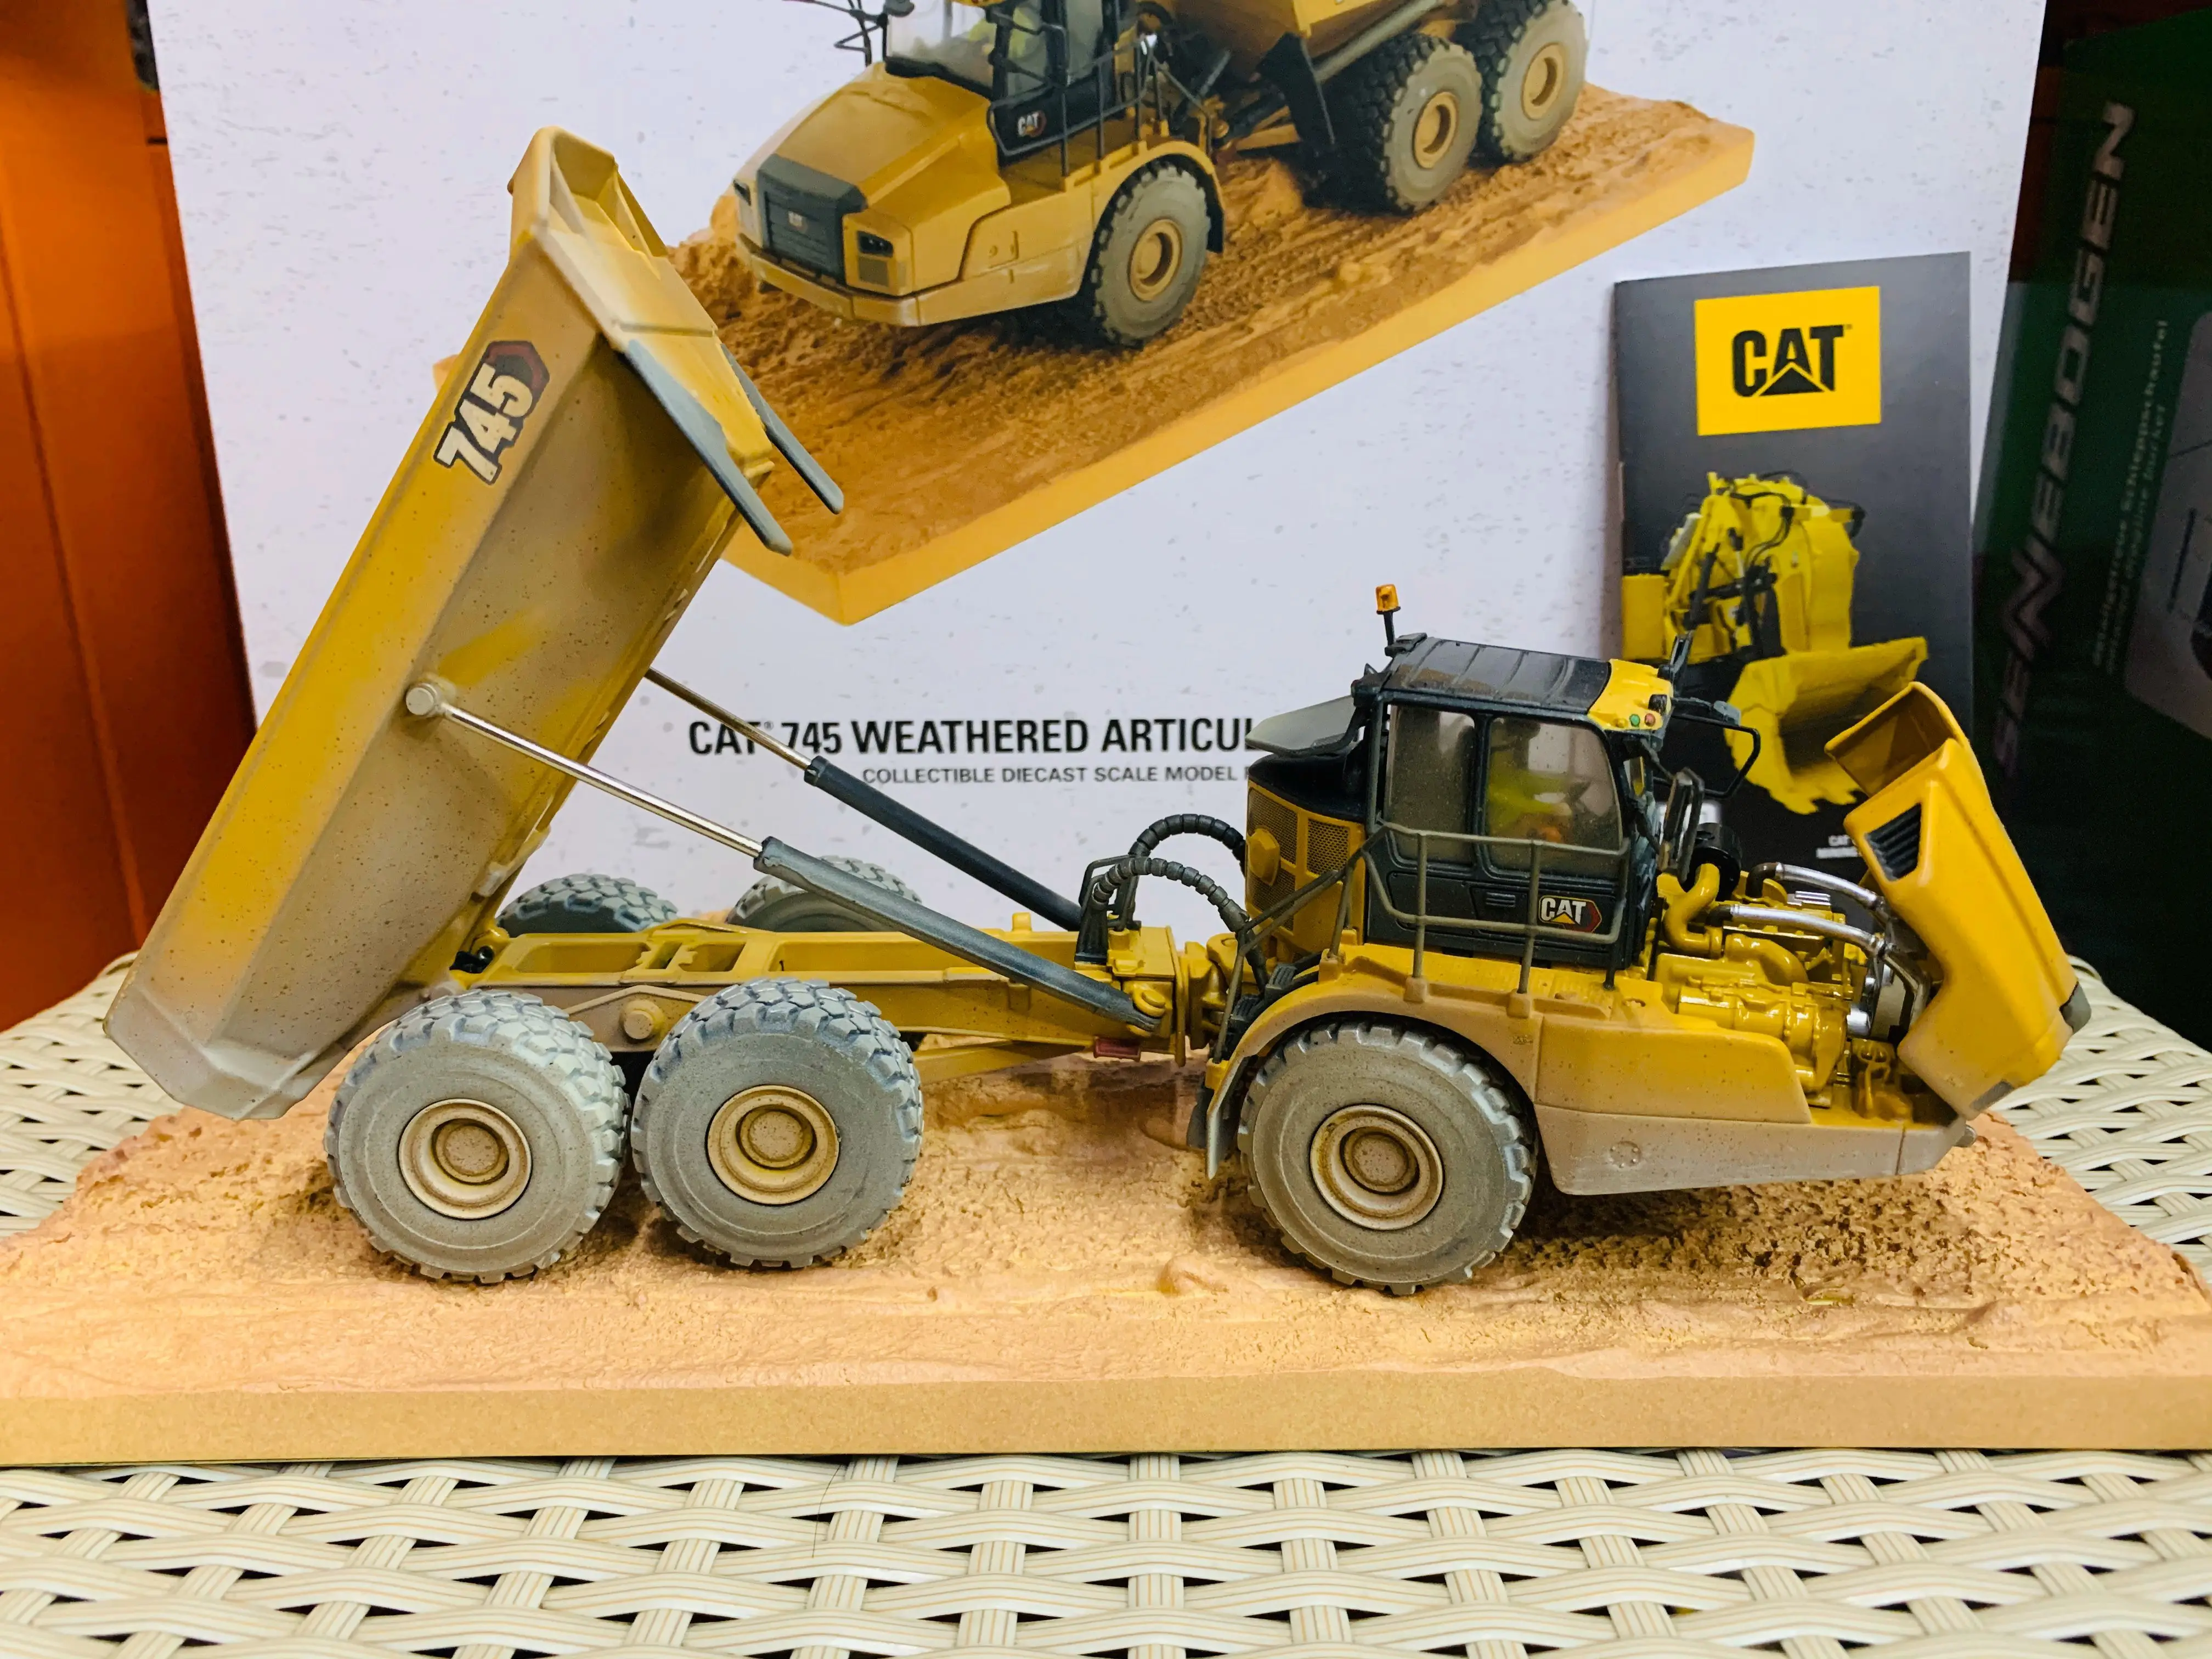 Cat 745 Weathered Articulated Truck 1/50 Scale Metal Model By Diecast Masters 85704 New in Original Box